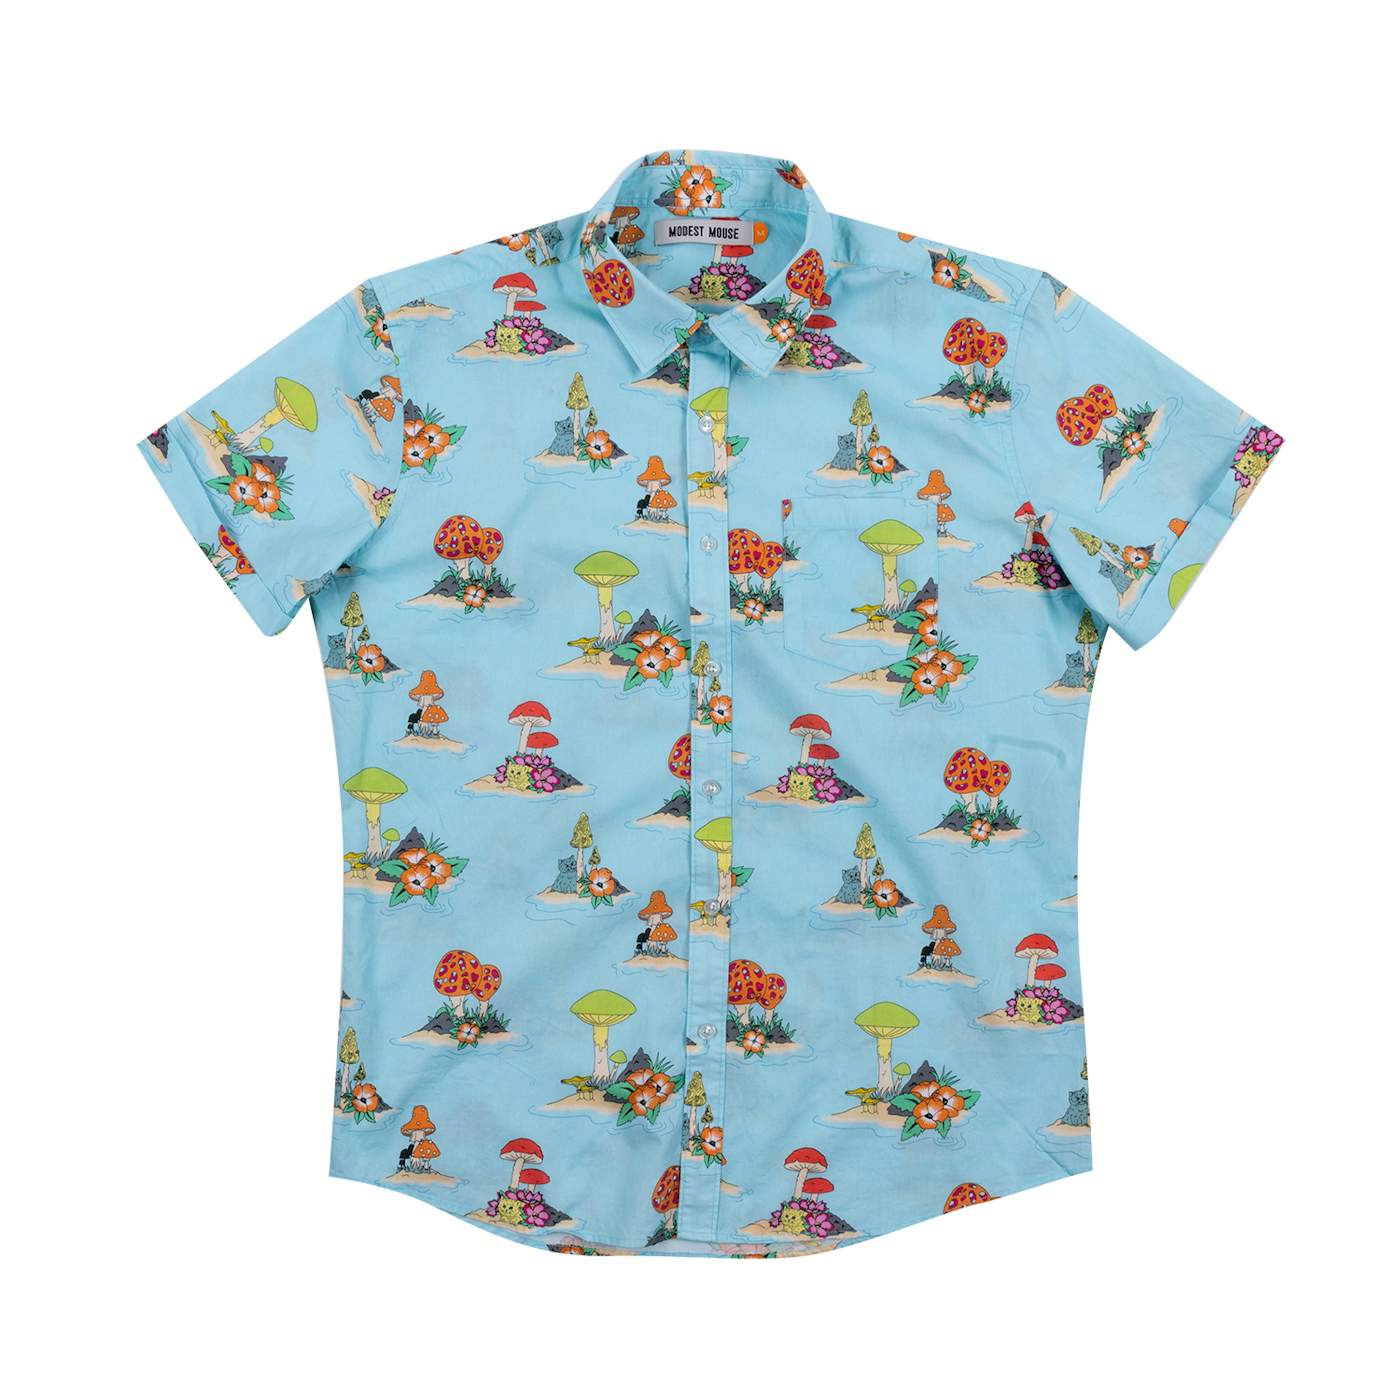 Modest Mouse Tropical Woven Button Up